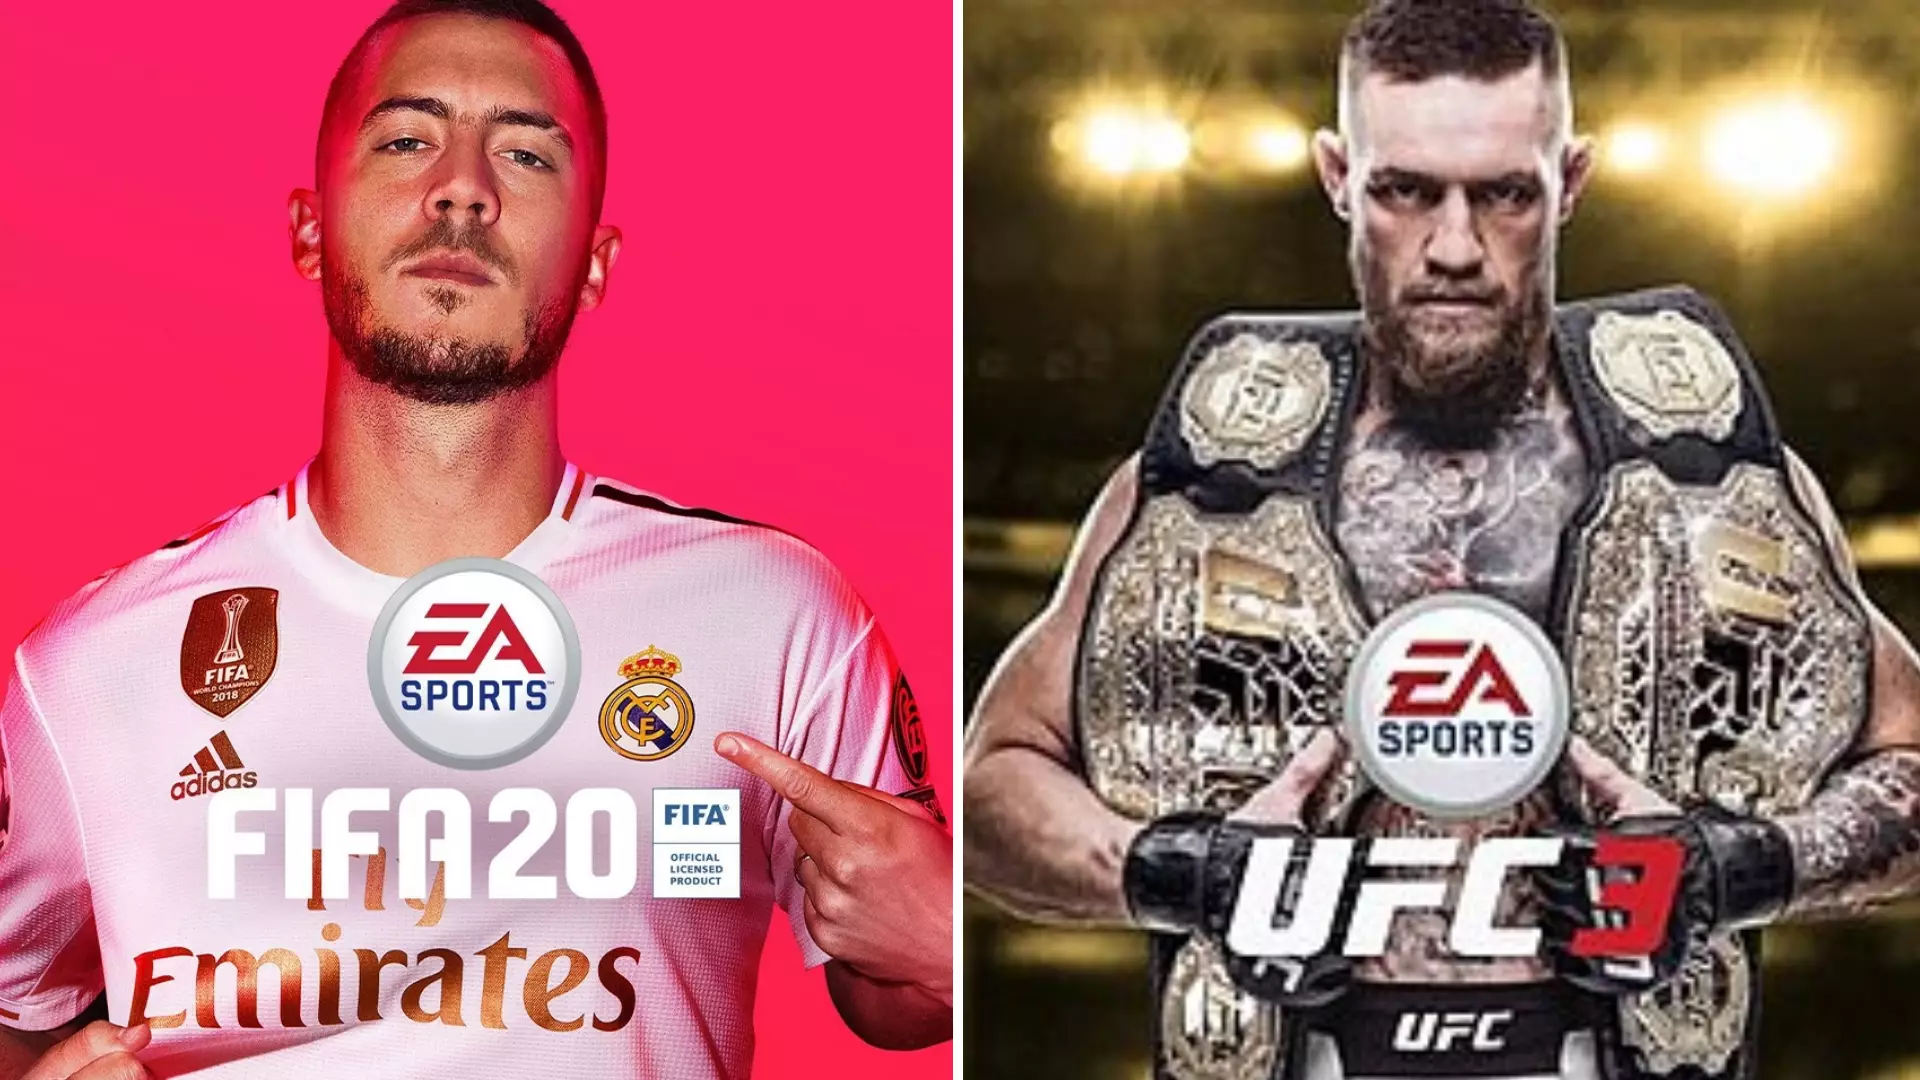 Prices For EA Sports UFC 3, FIFA 20 And Other Sports Games Slashed In Mega-Sale